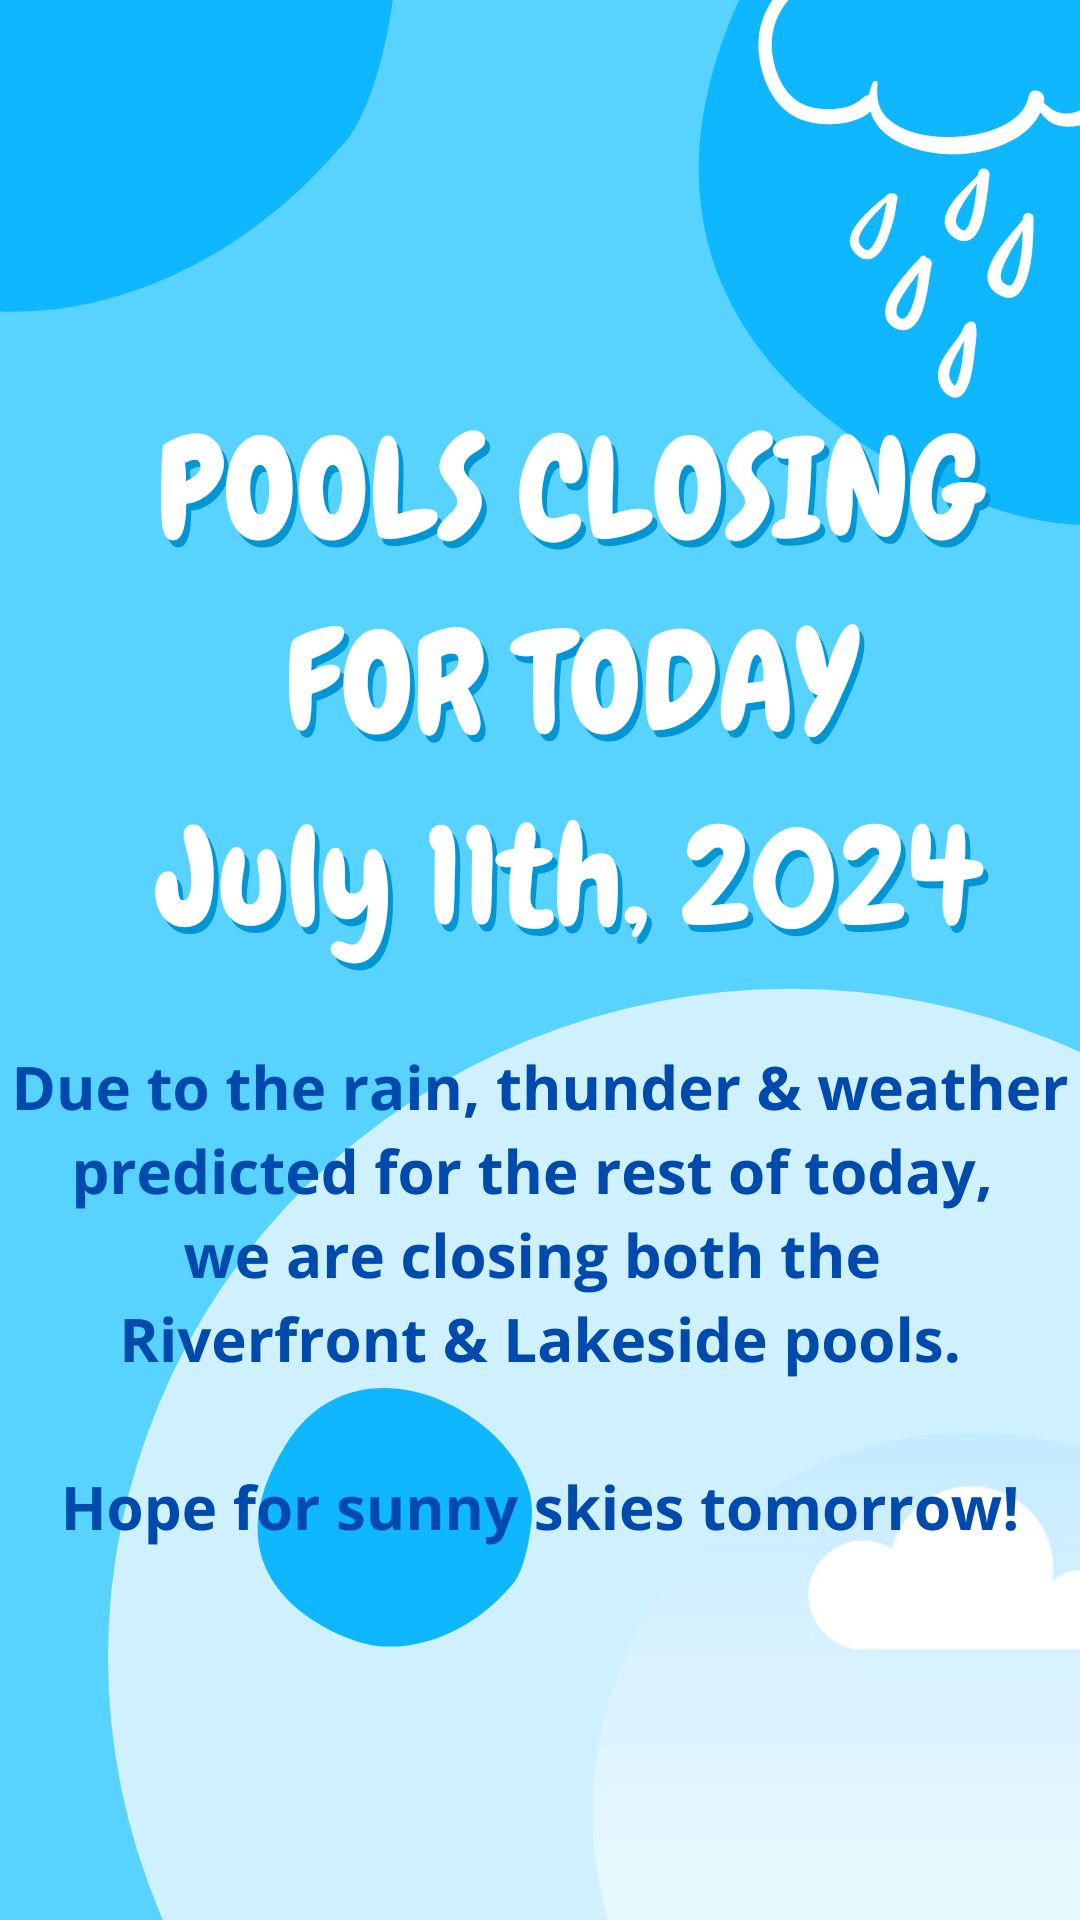 POOLS CLOSING FOR TODAY July 11th, 2024